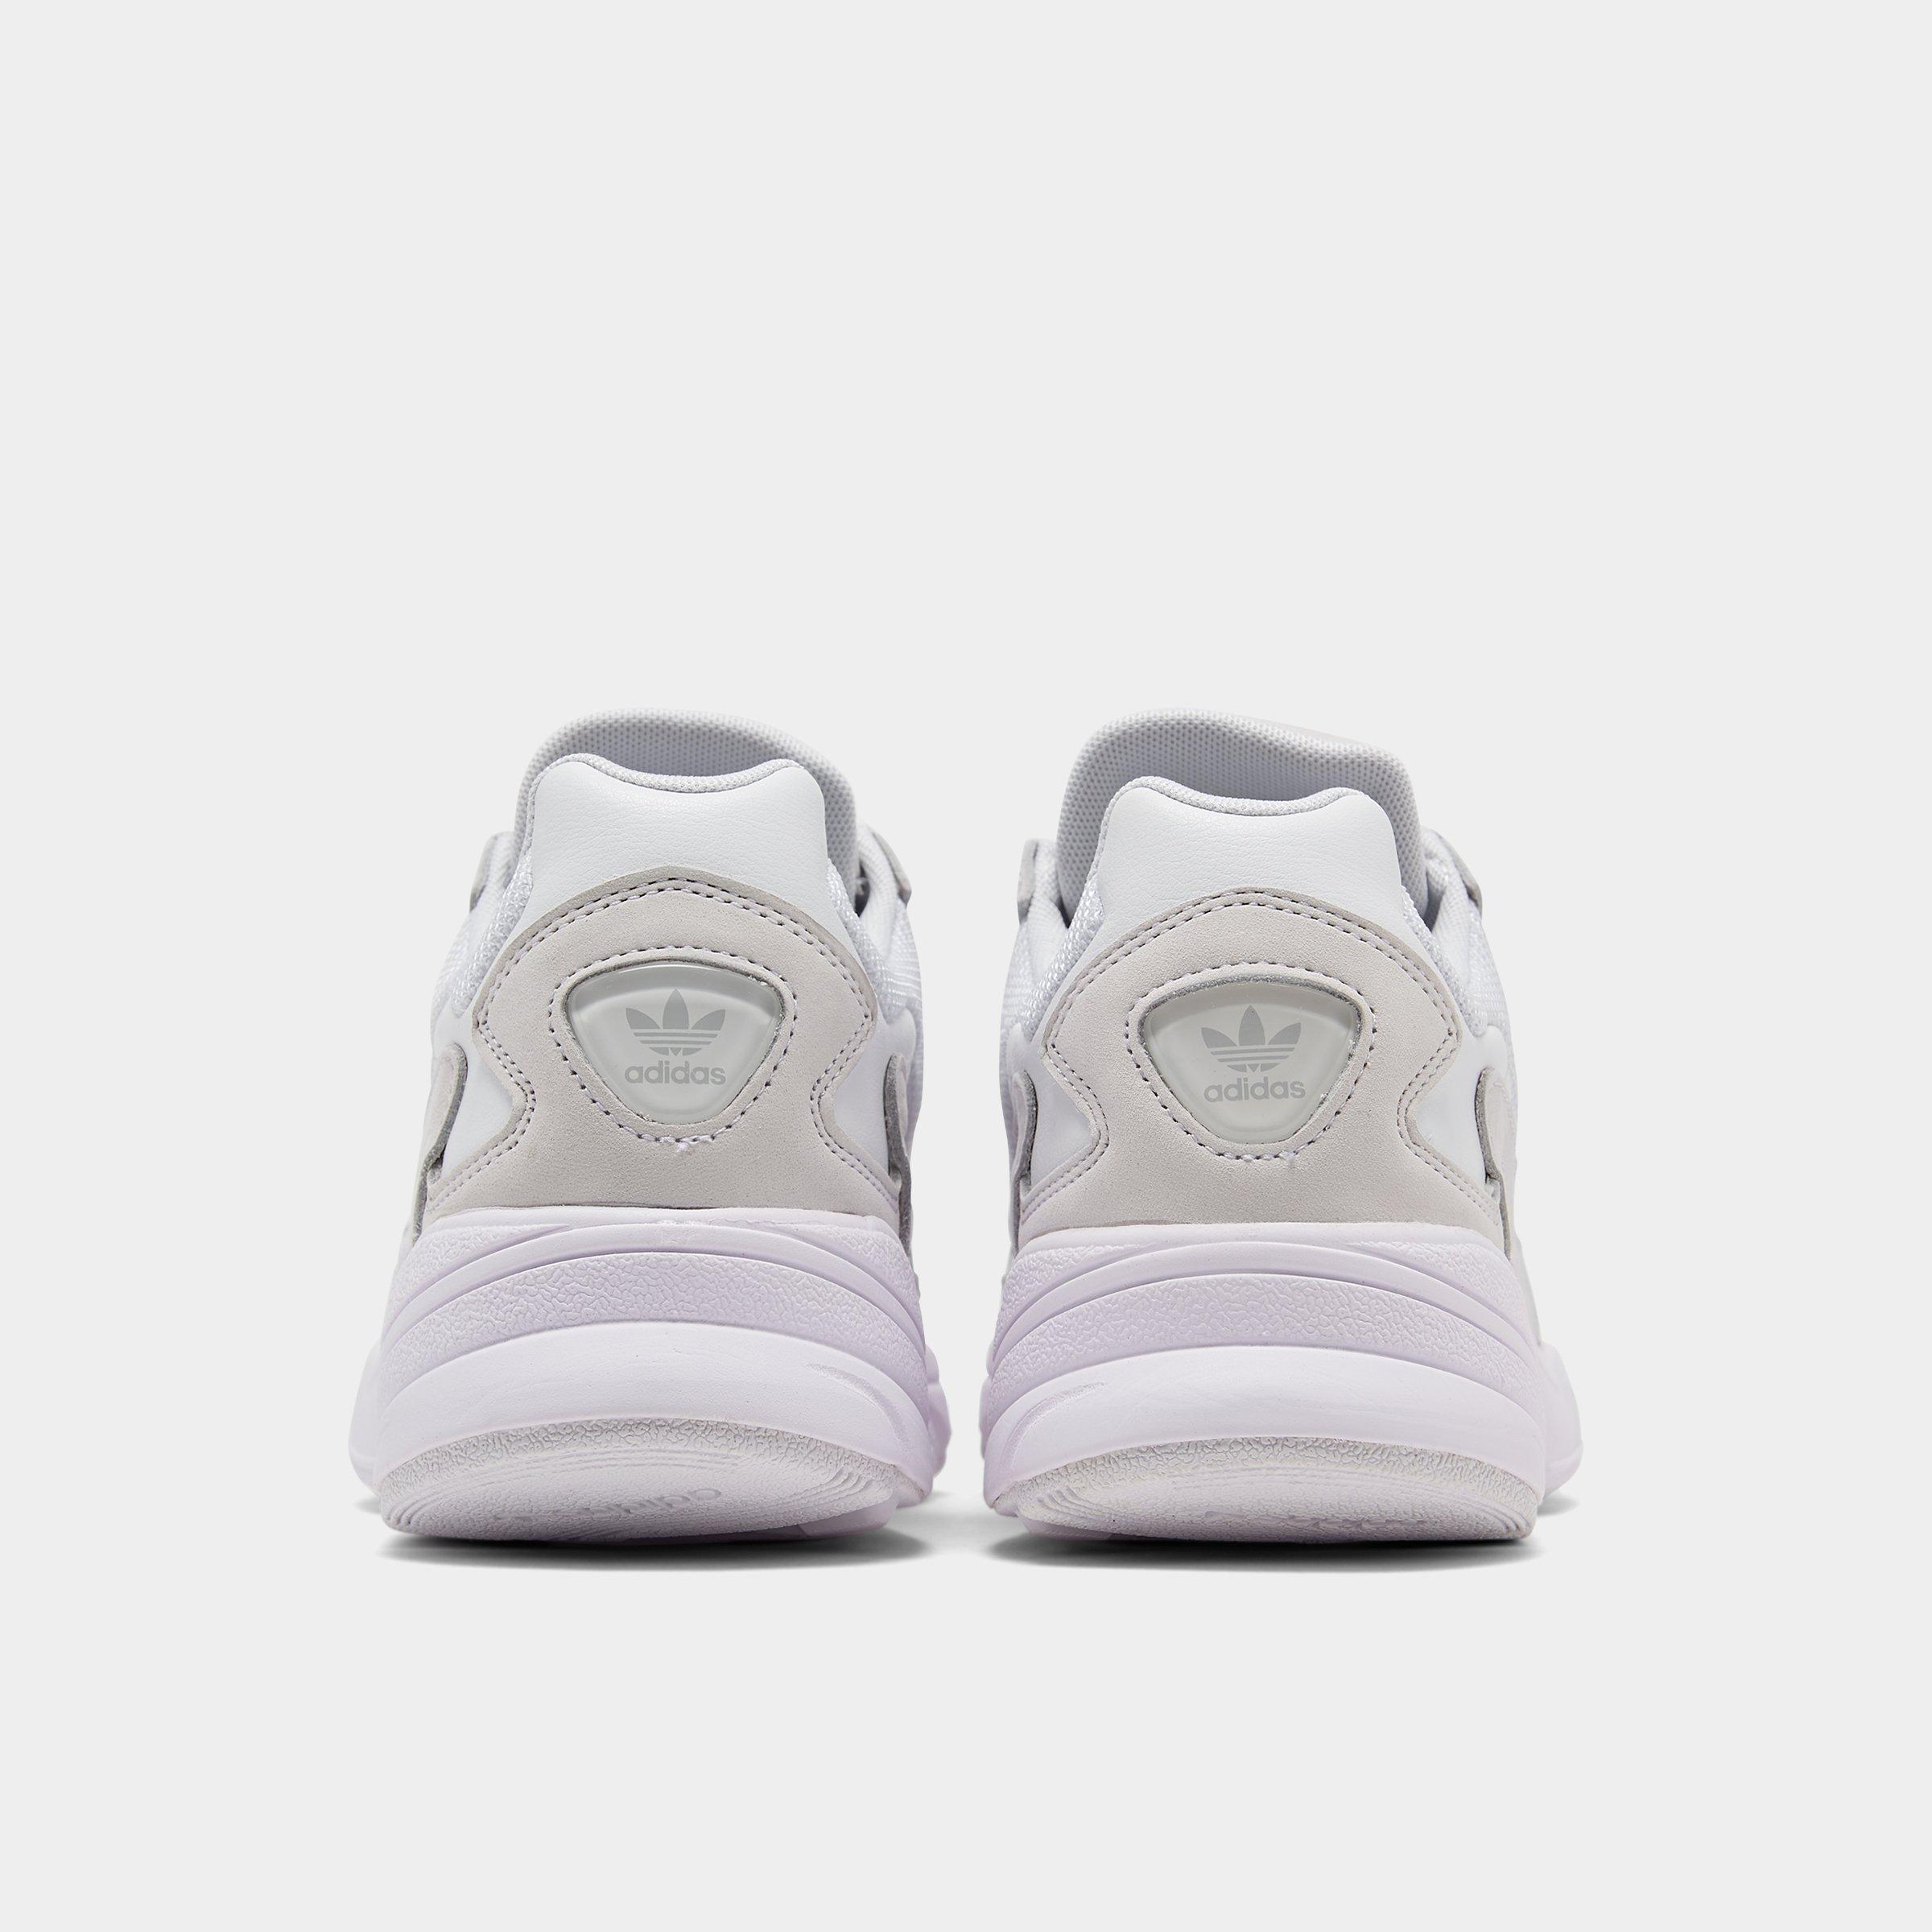 women's originals falcon casual sneakers from finish line